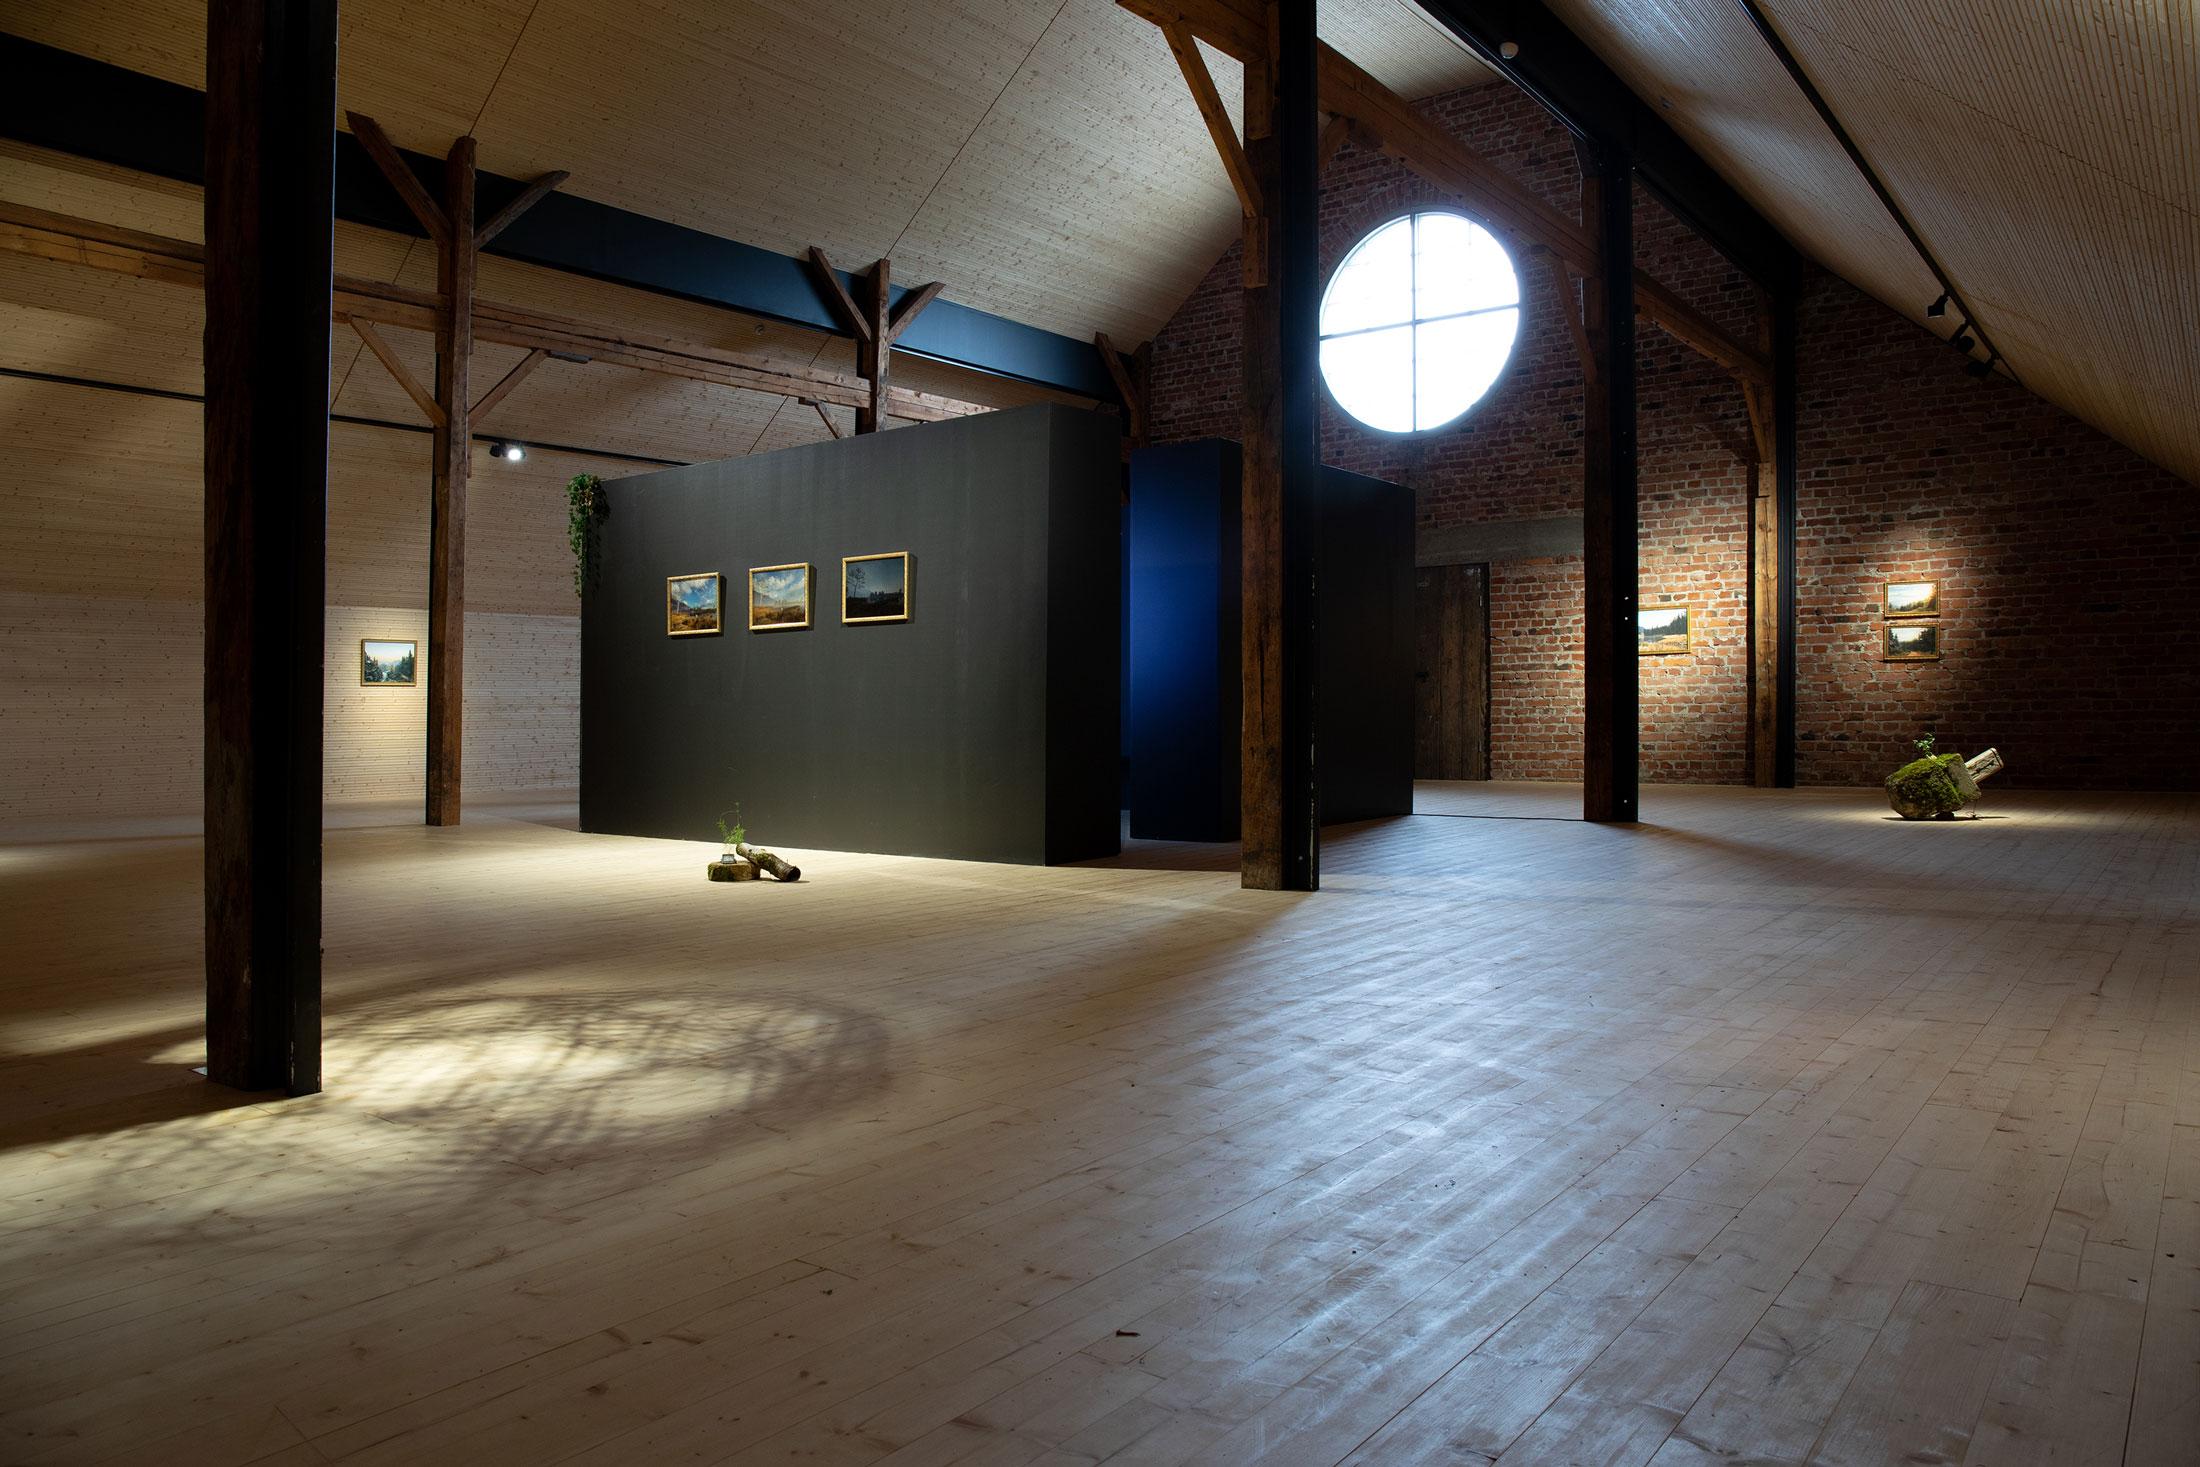 A vast, dimly lit, industrial looking exhibition space. Some artworks like framed images, and sculptures are minimally spread out and distantly visible.